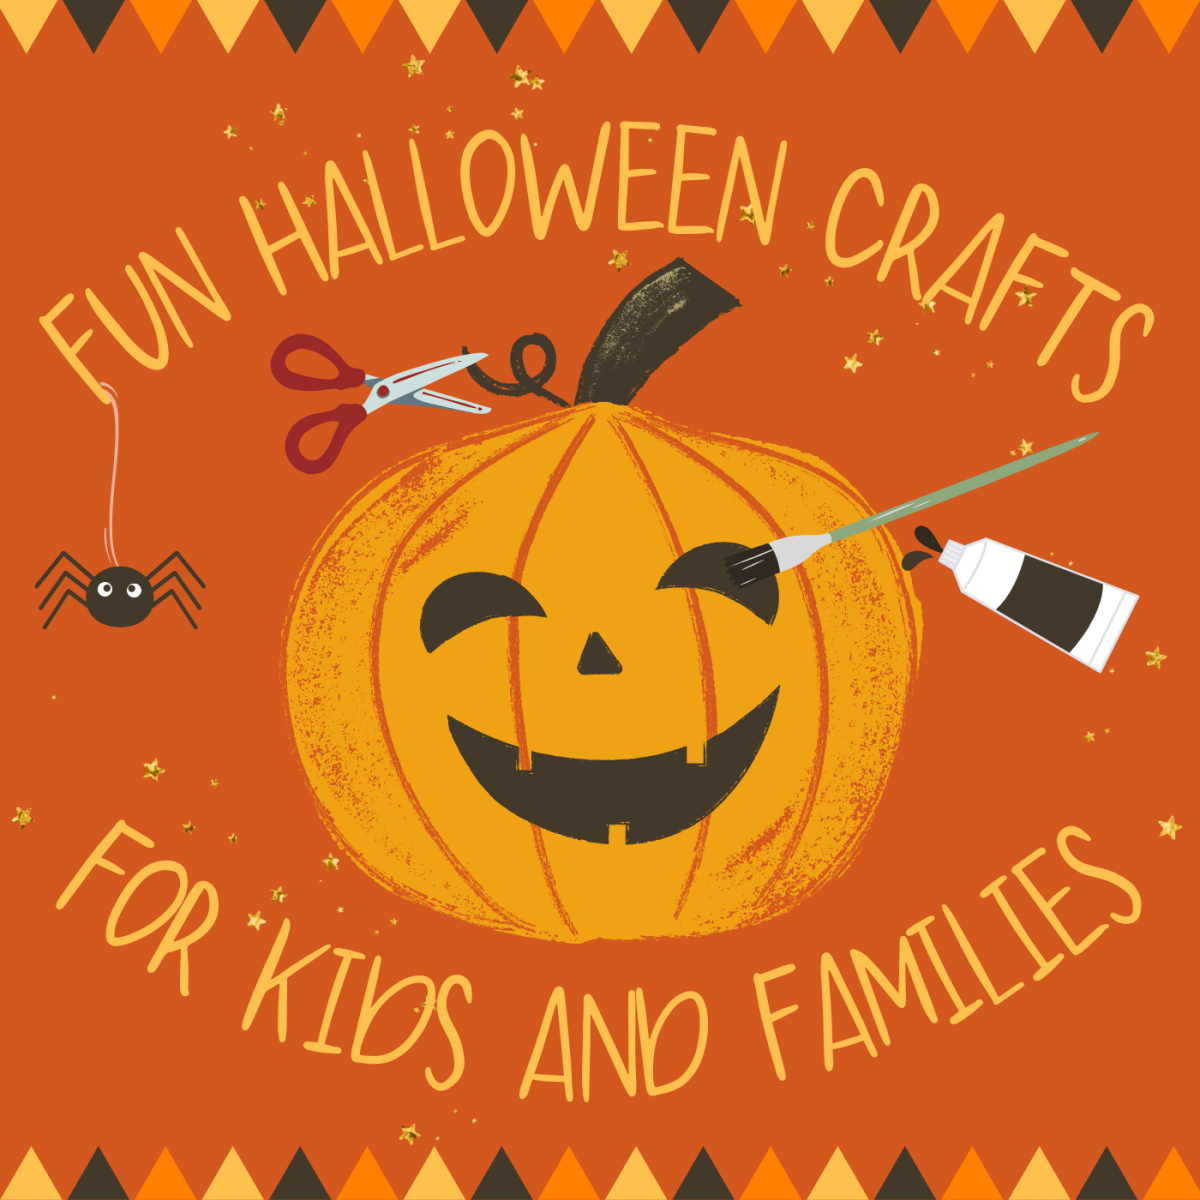 From painting pumpkins to crafting spiderwebs out of popsicle sticks, discover some fun Halloween projects for the whole family!